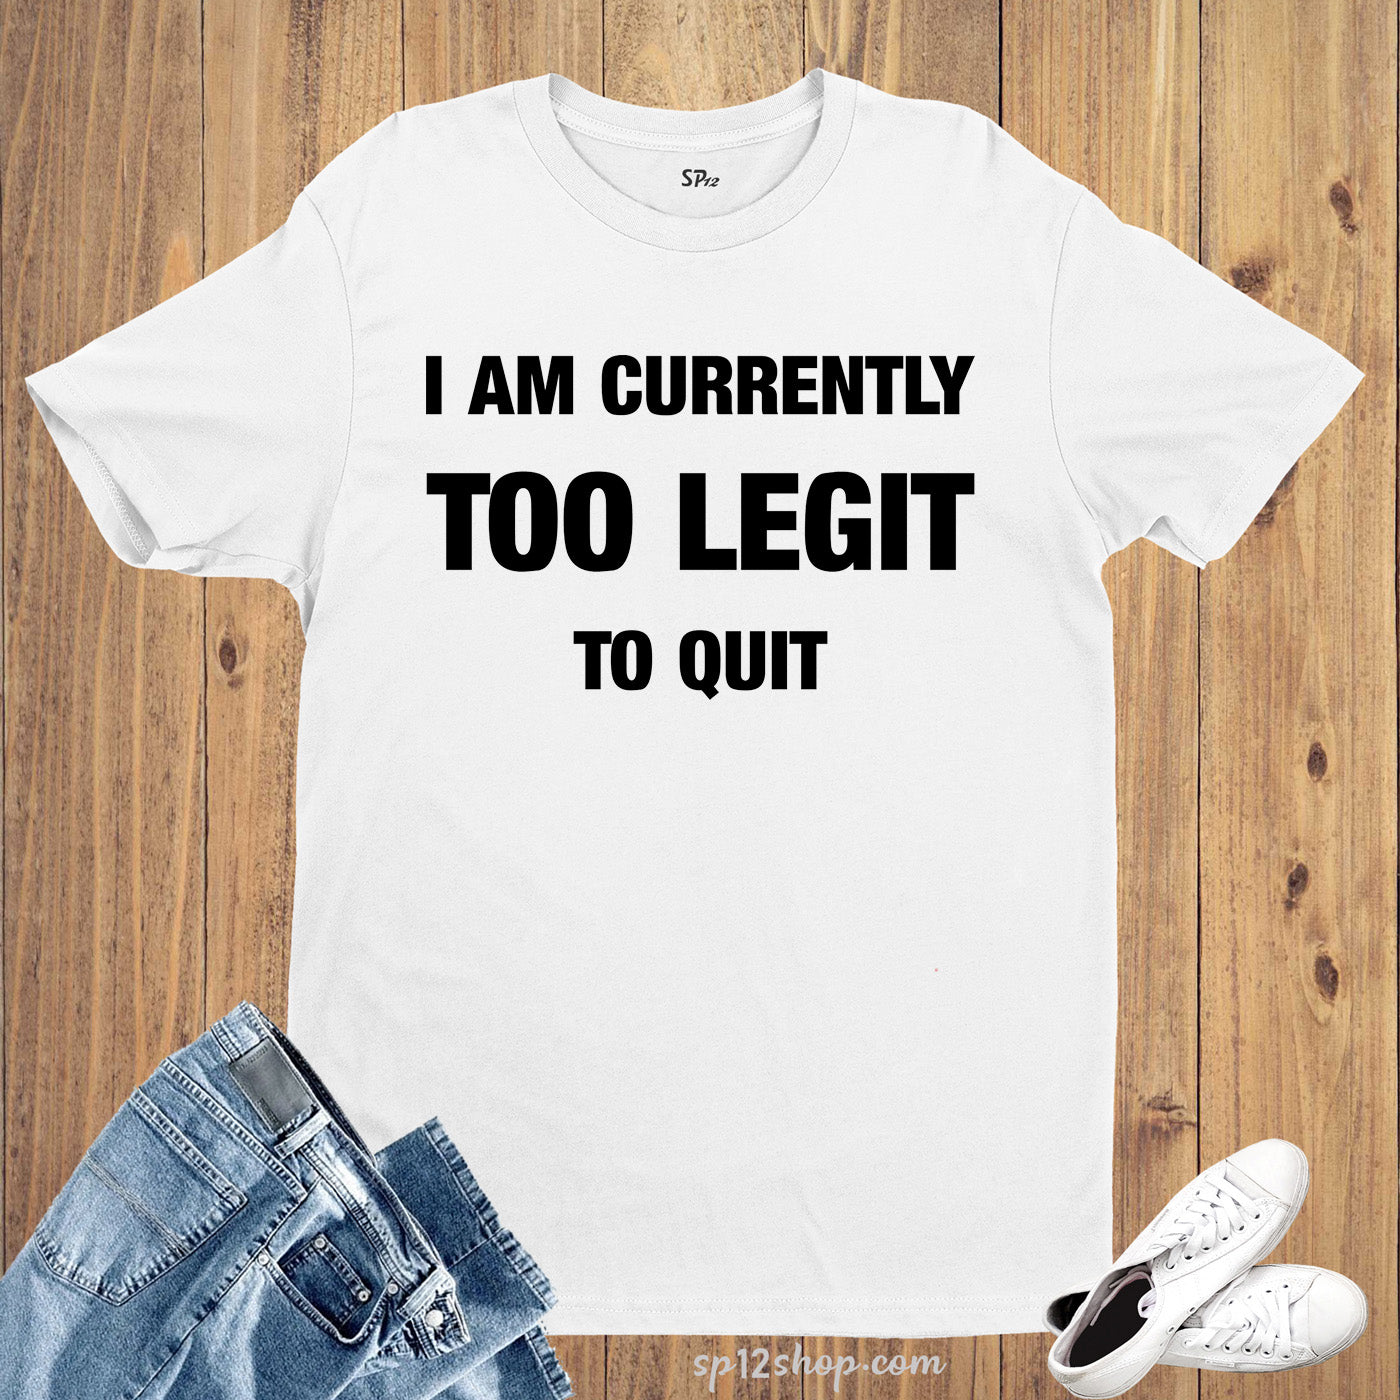 I Am Currently Too Legit To Quit Funny Slogan T shirt